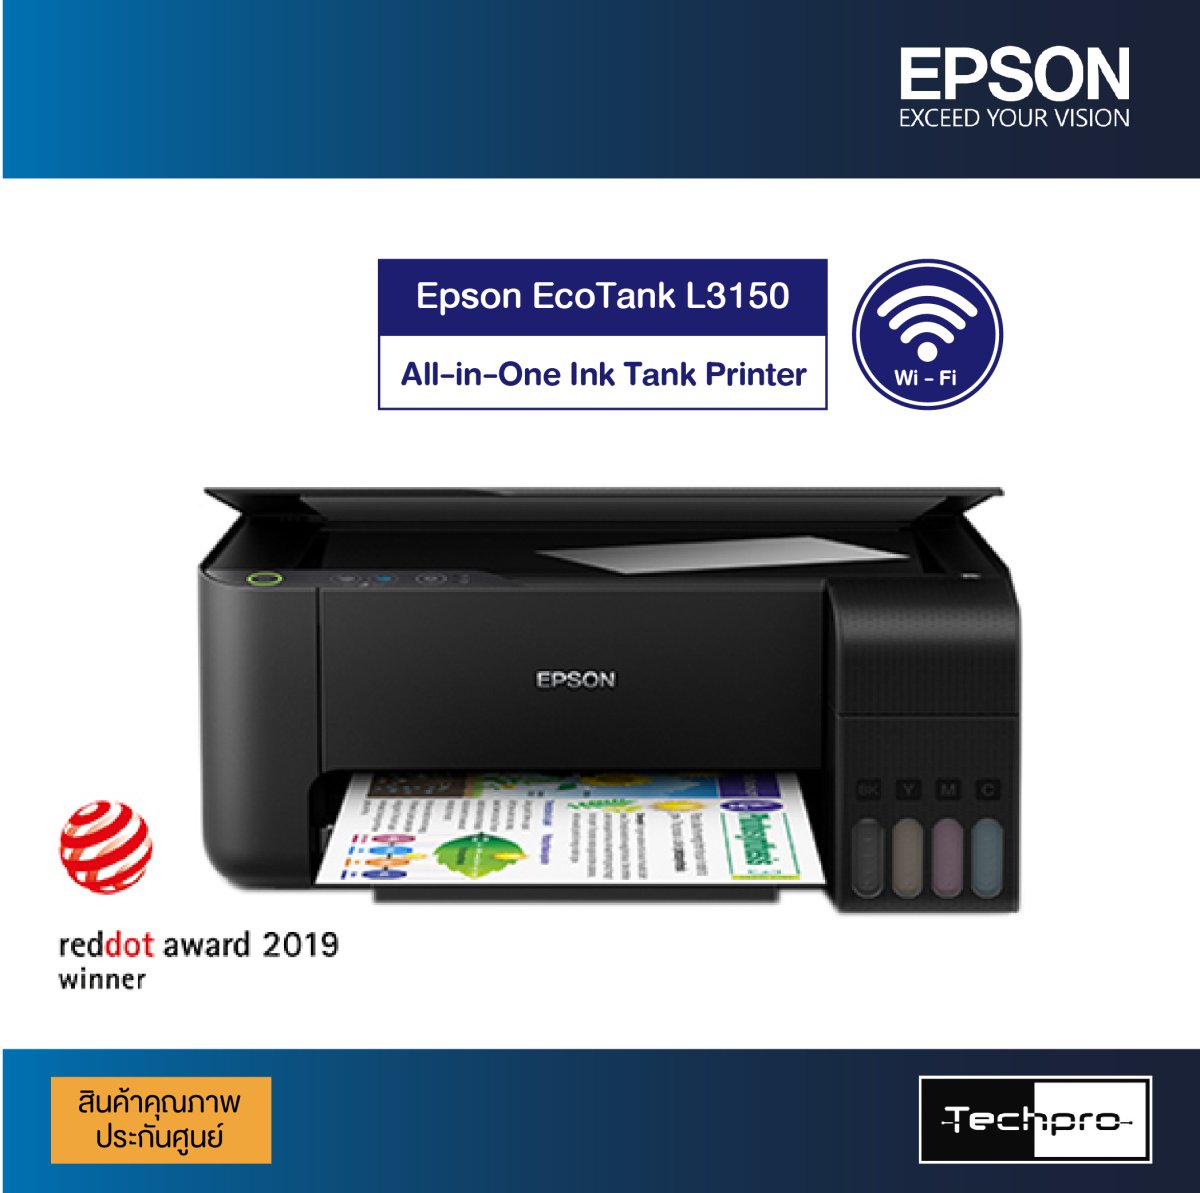 Epson L3150 Wi Fi All In One Eco Tank Printer Shopee Malaysia Images 4197